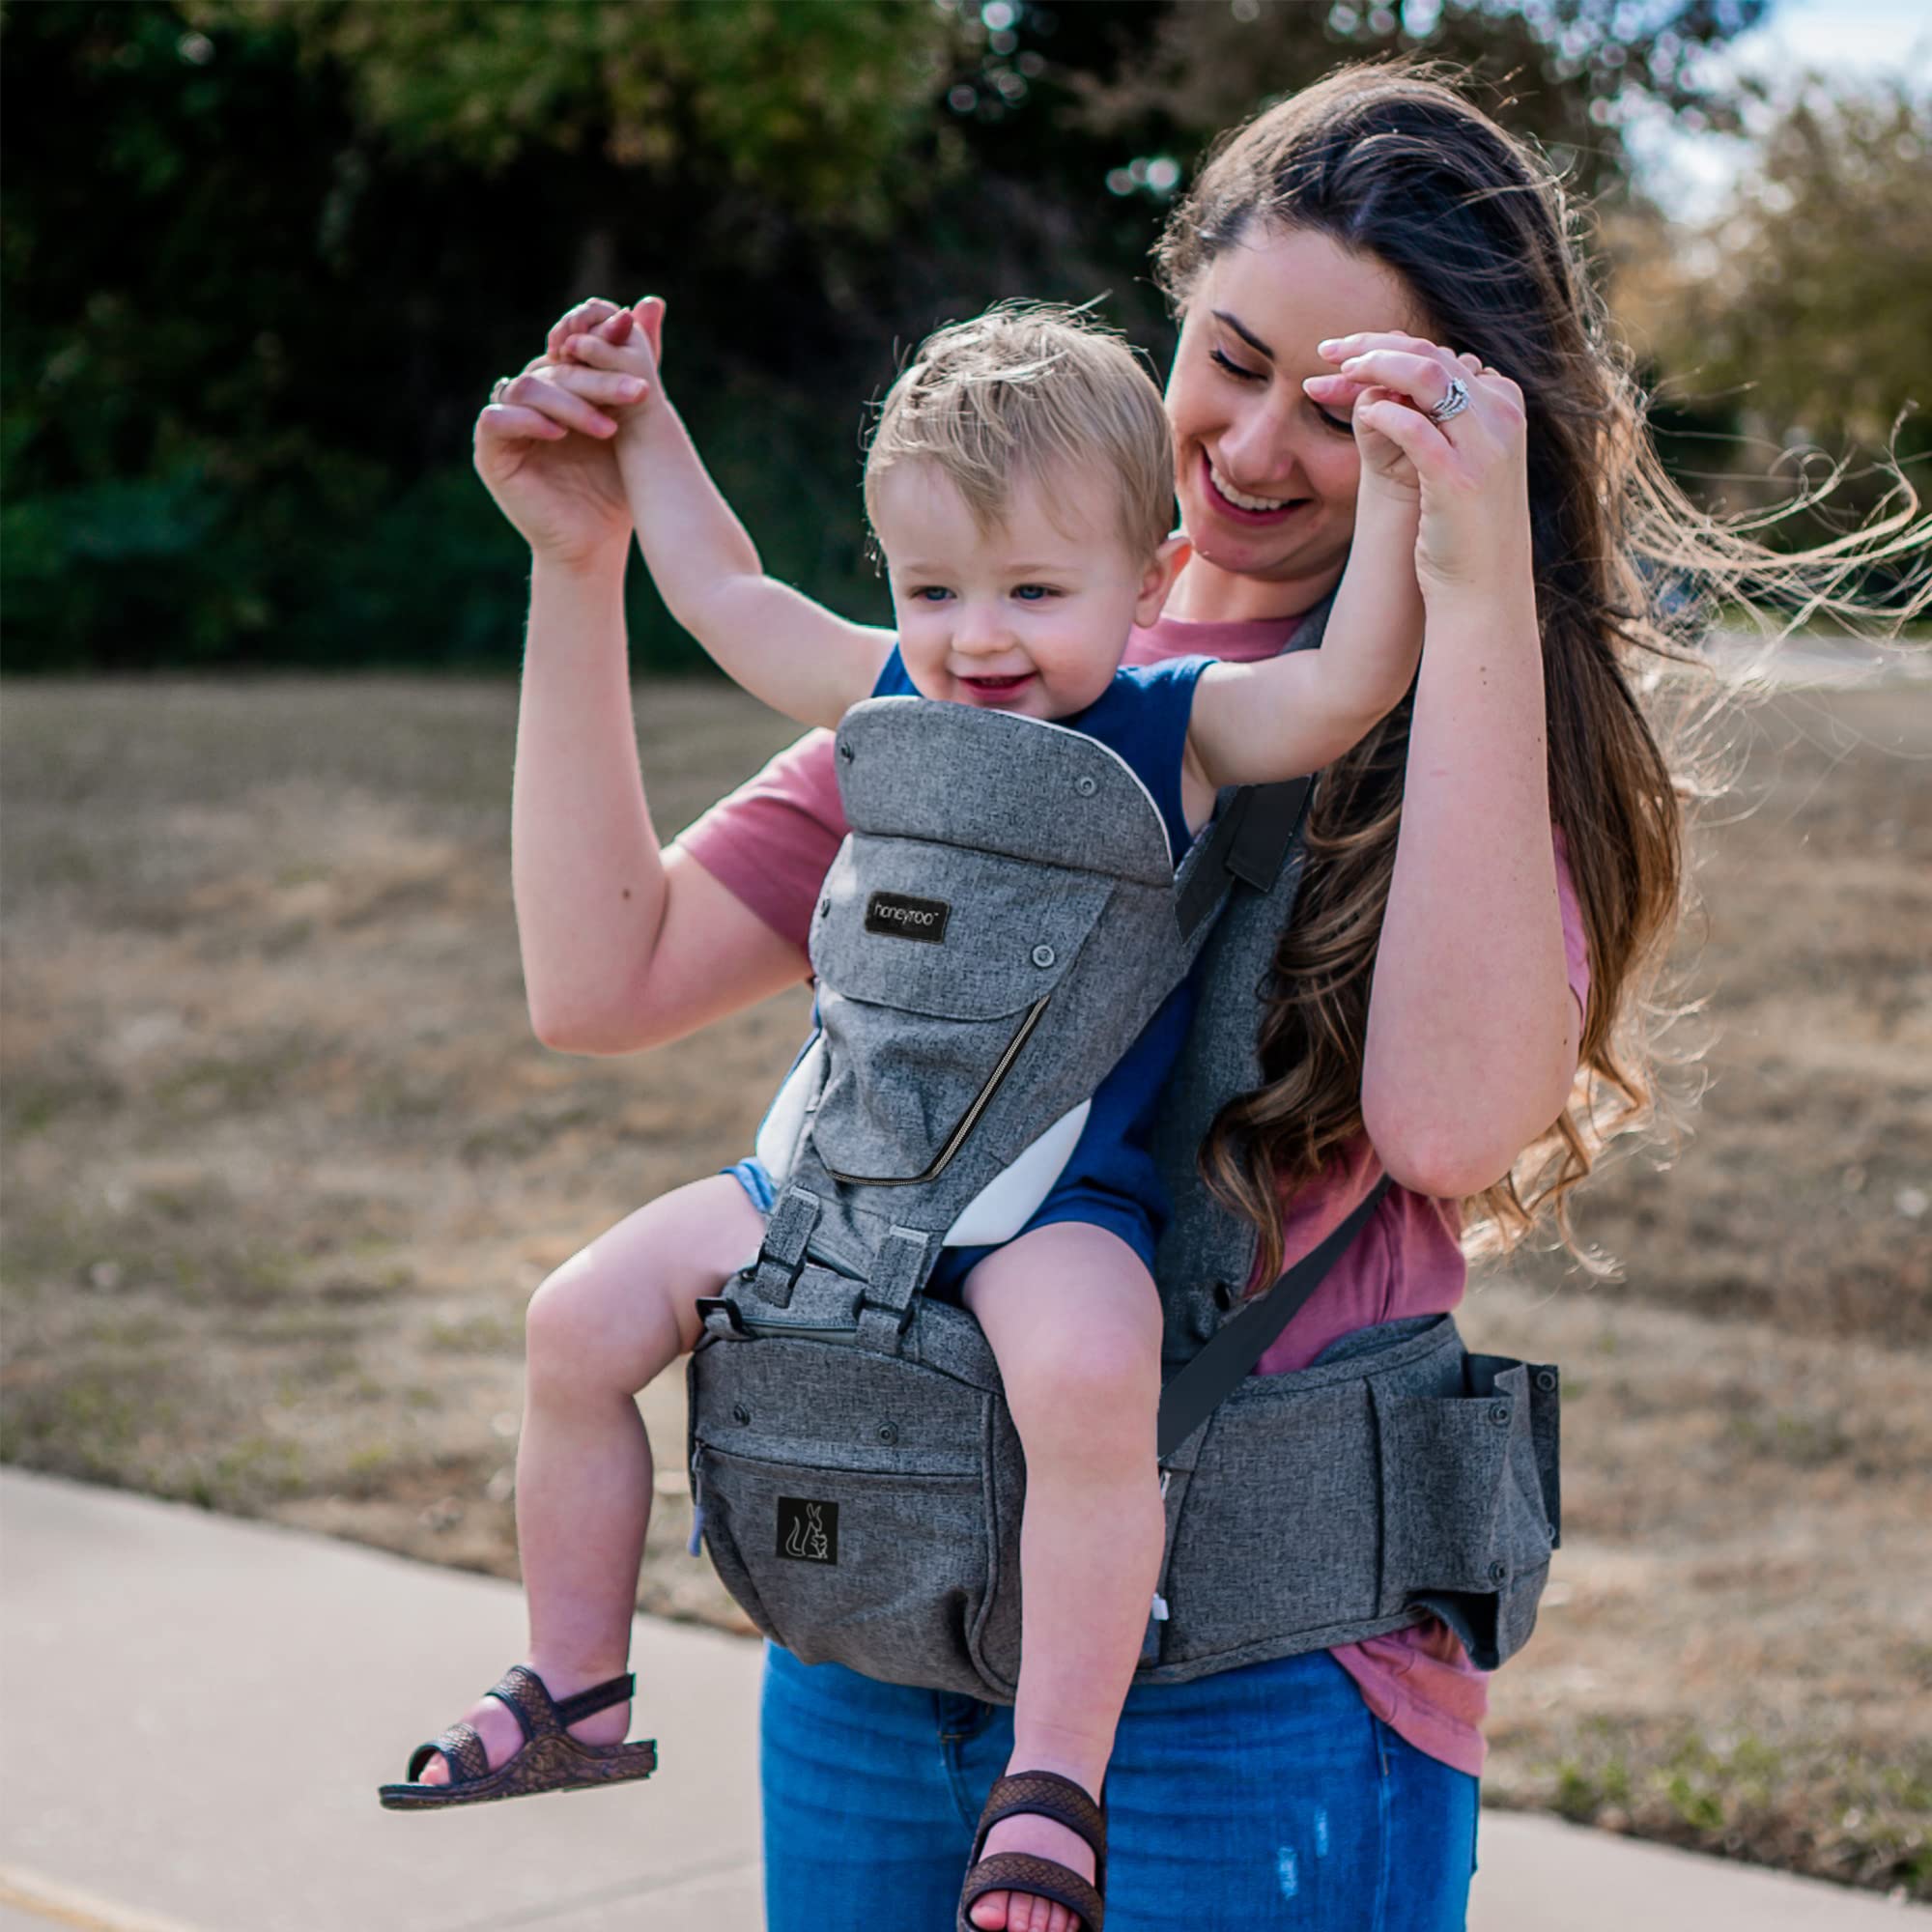 honeyroo Baby Carrier, Joey Classic, Ergonomic 3D Hip Seat, New Magnetic Self Buckling Clips, Light Weight and Breathable - 6 in 1 Position Design, 3-36 Months, Front and Back Carry, Platinum Gray